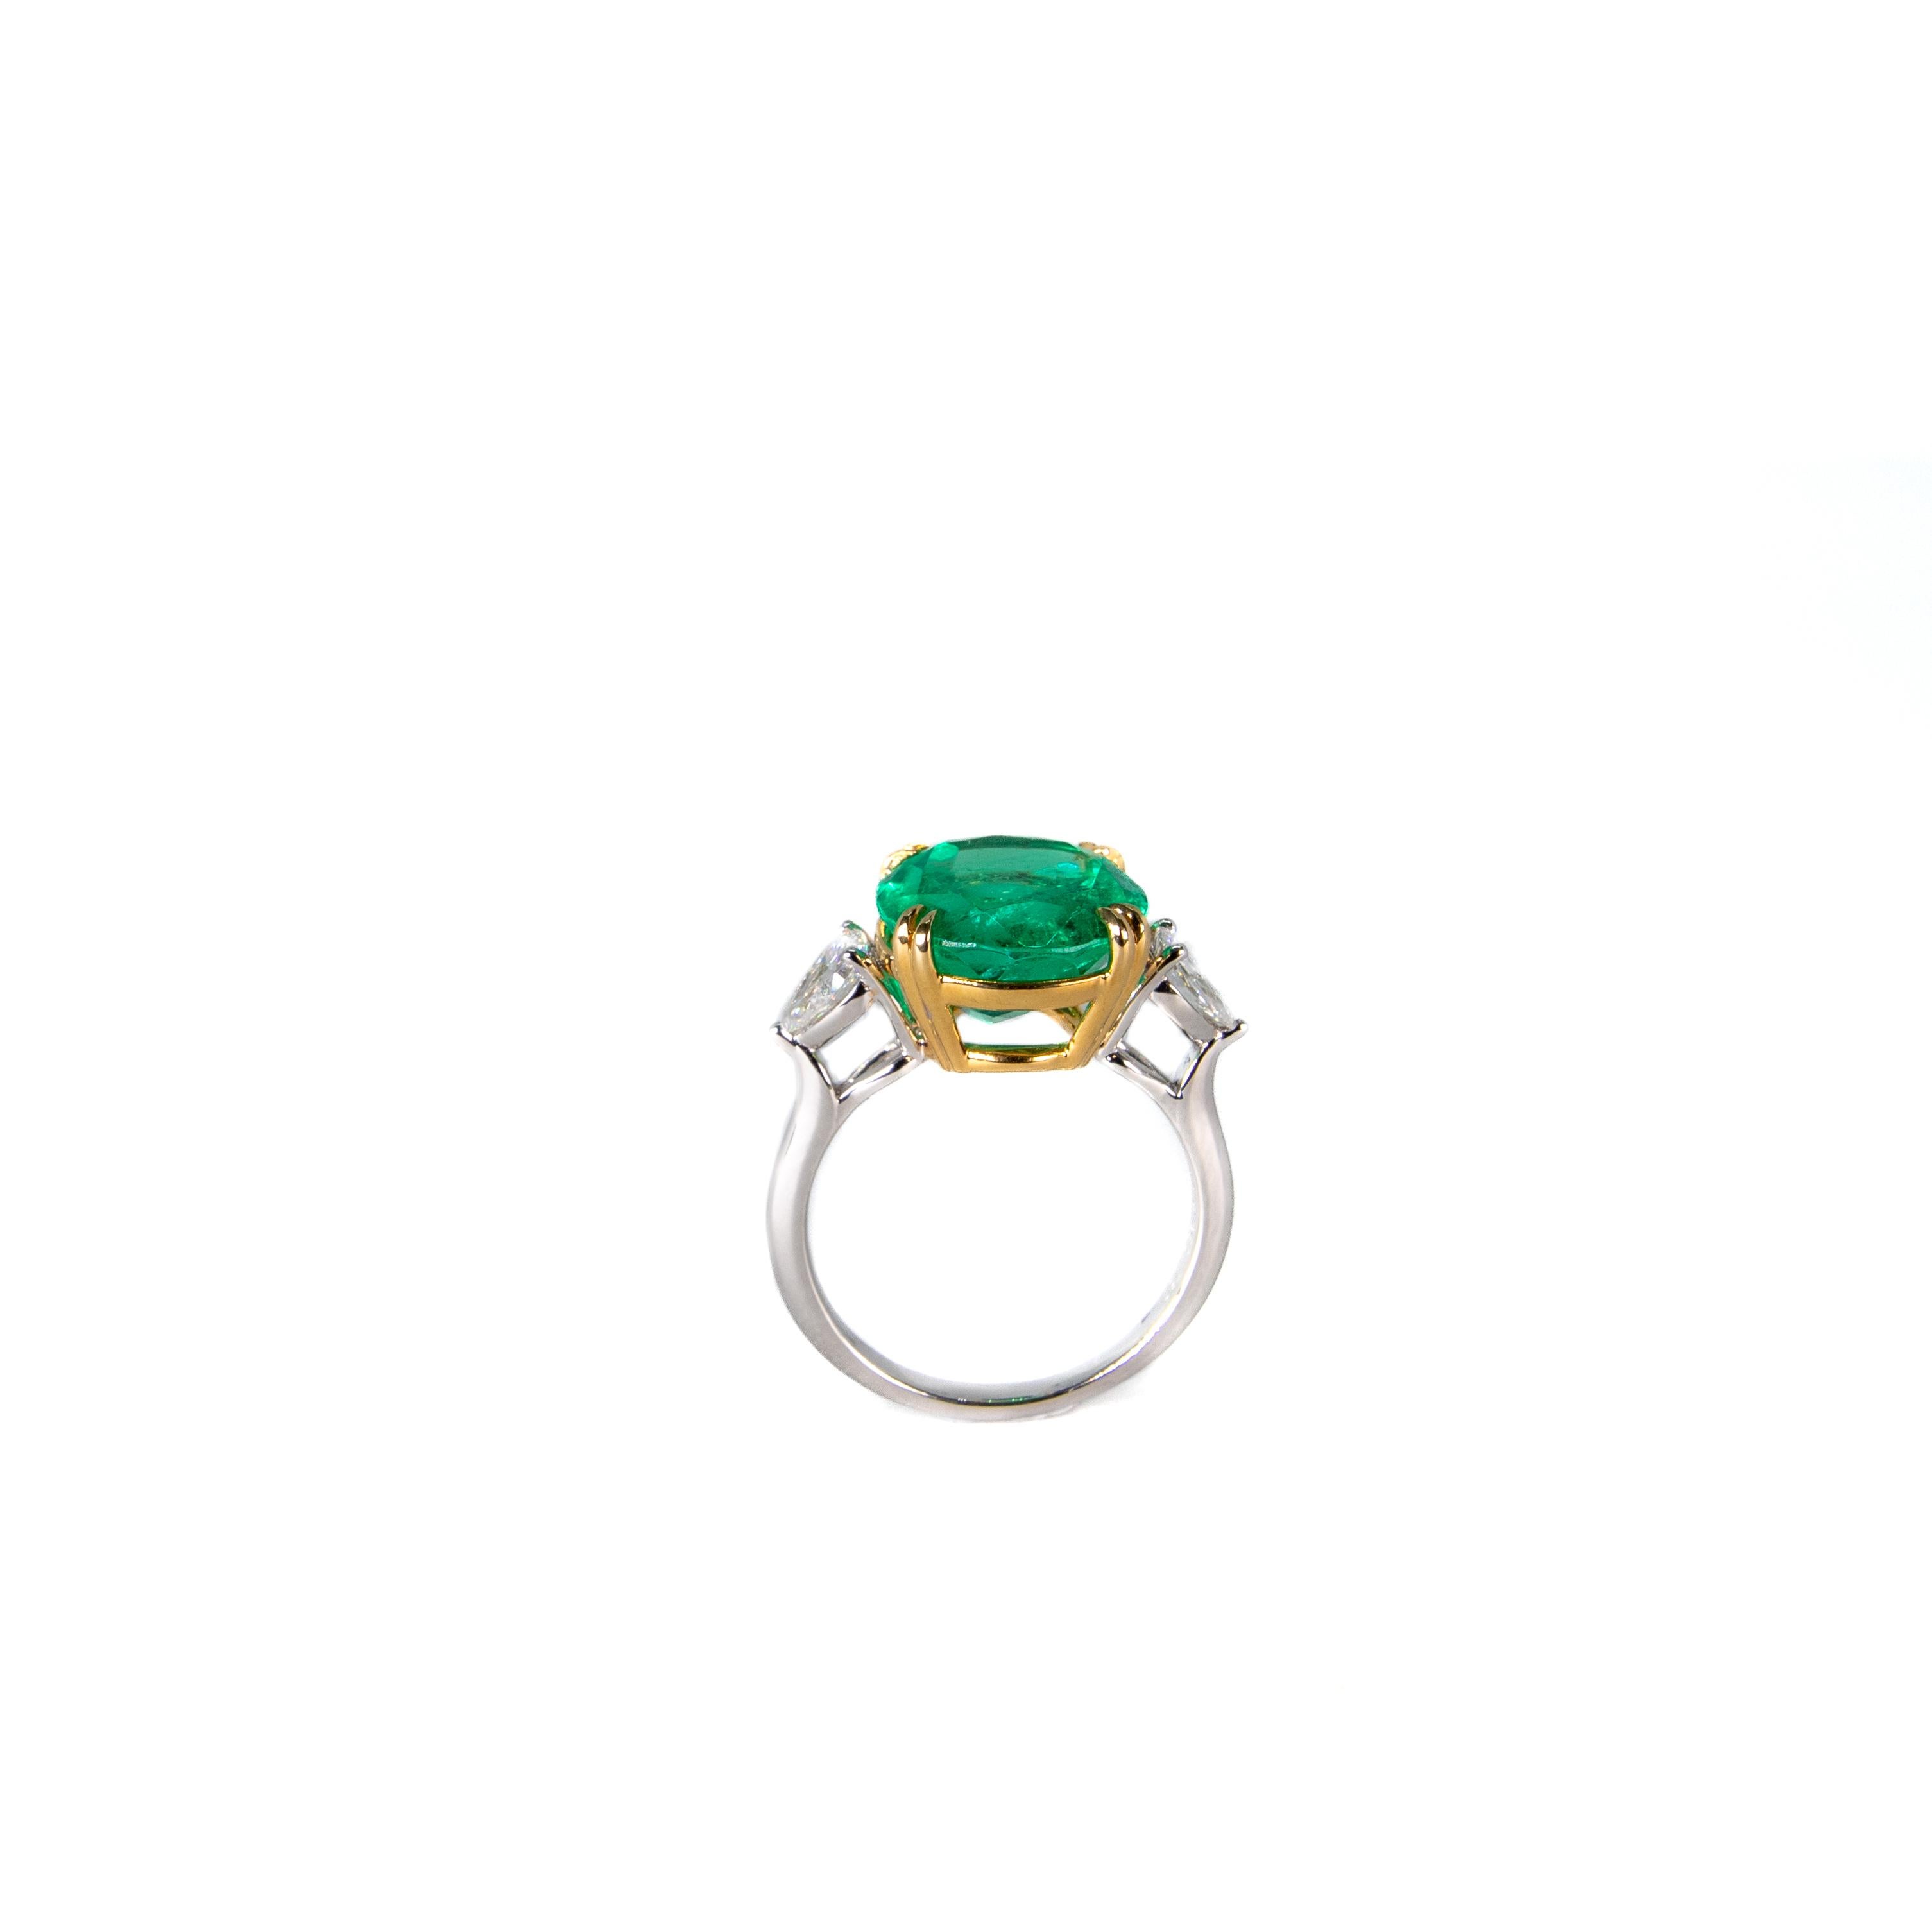 Oval Cut 5.51ct Certified Colombian Emerald Insignificant Oil and Pear Shape Diamond Ring For Sale